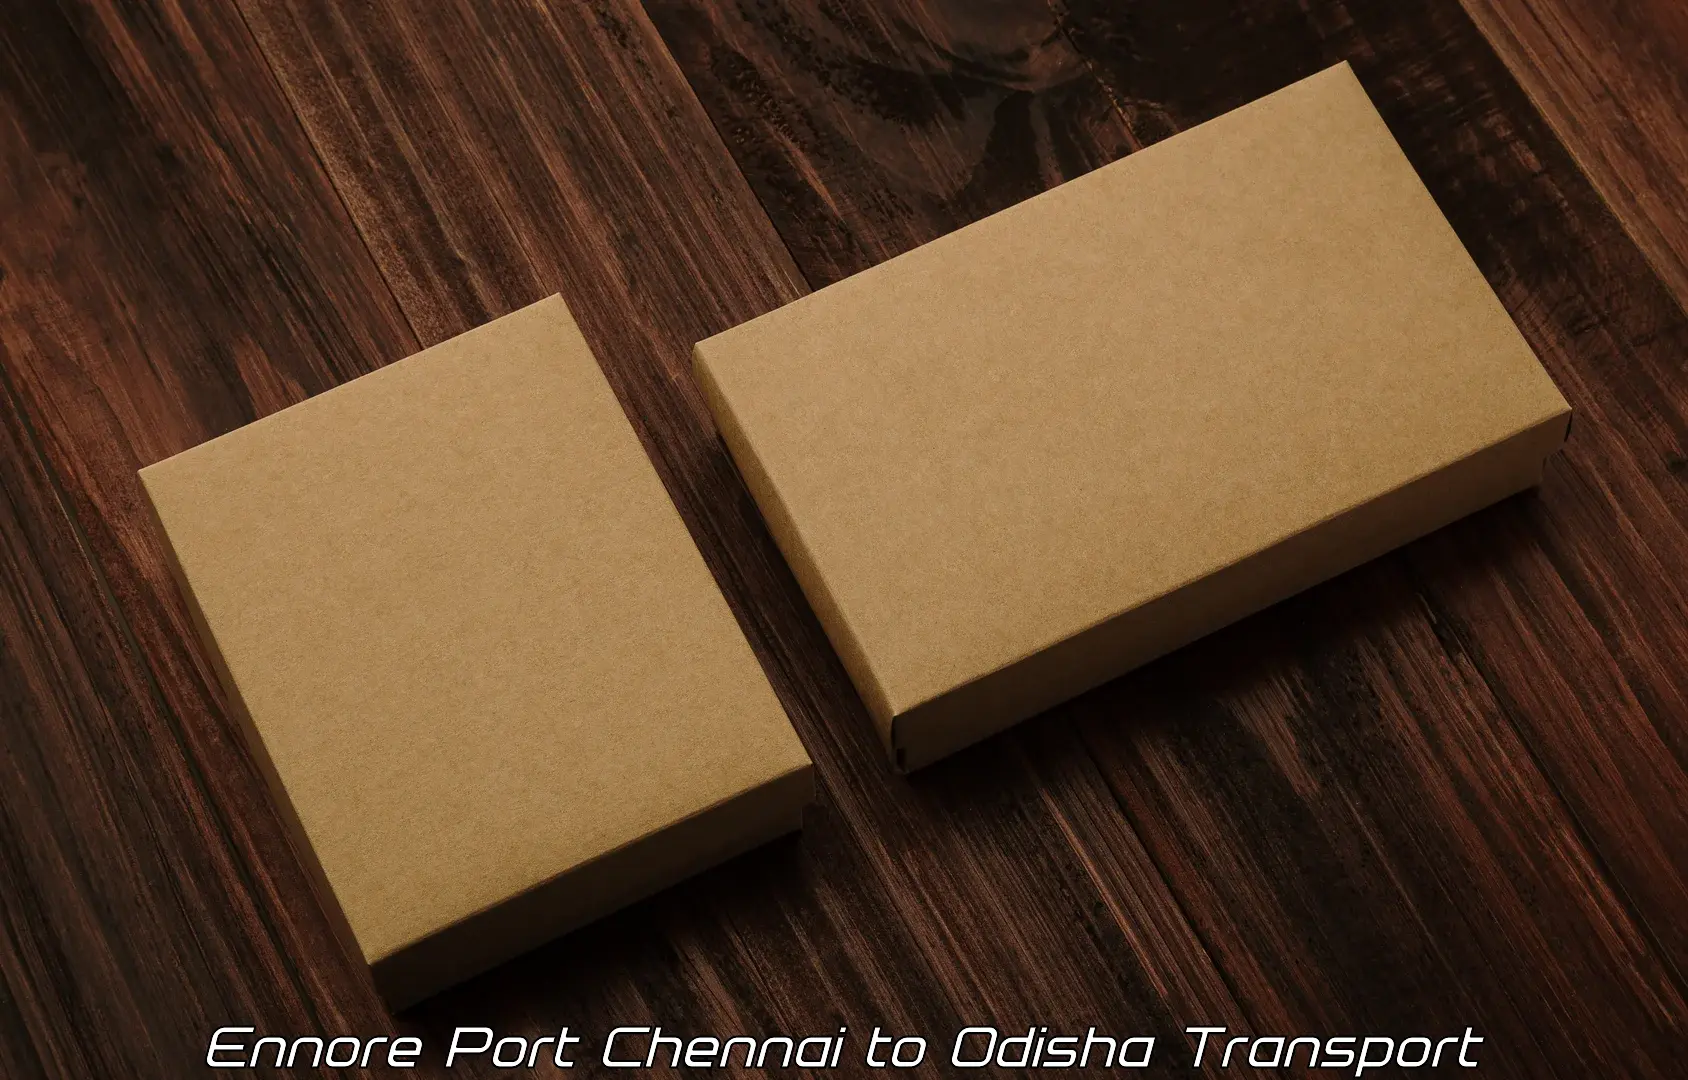 Nearby transport service Ennore Port Chennai to Dhamara